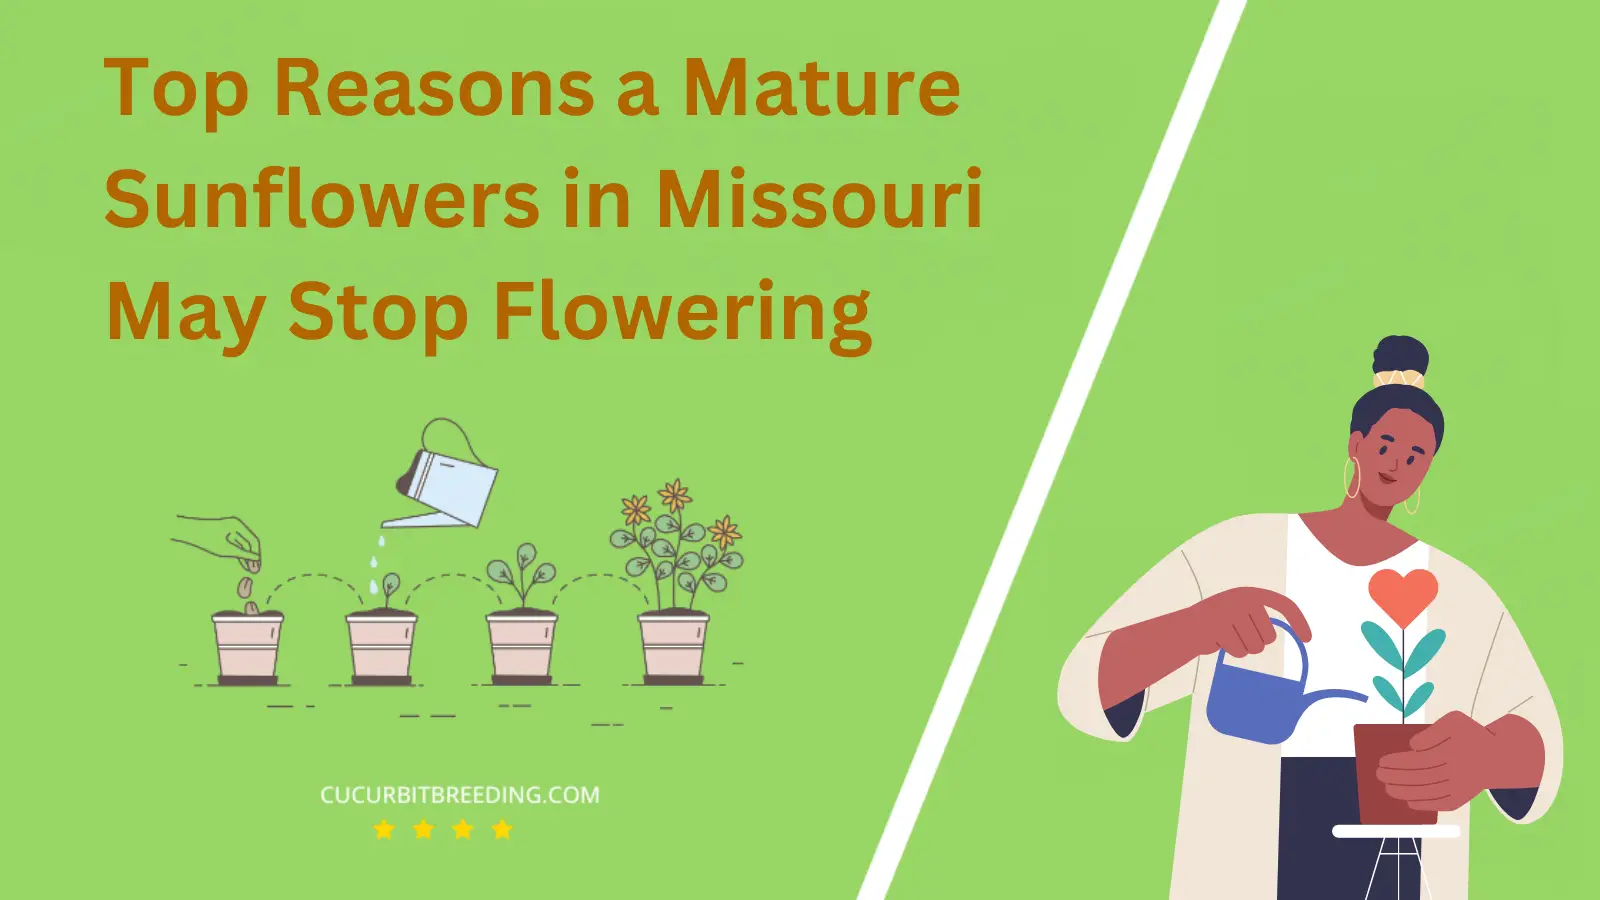 Top Reasons a Mature Sunflowers in Missouri May Stop Flowering